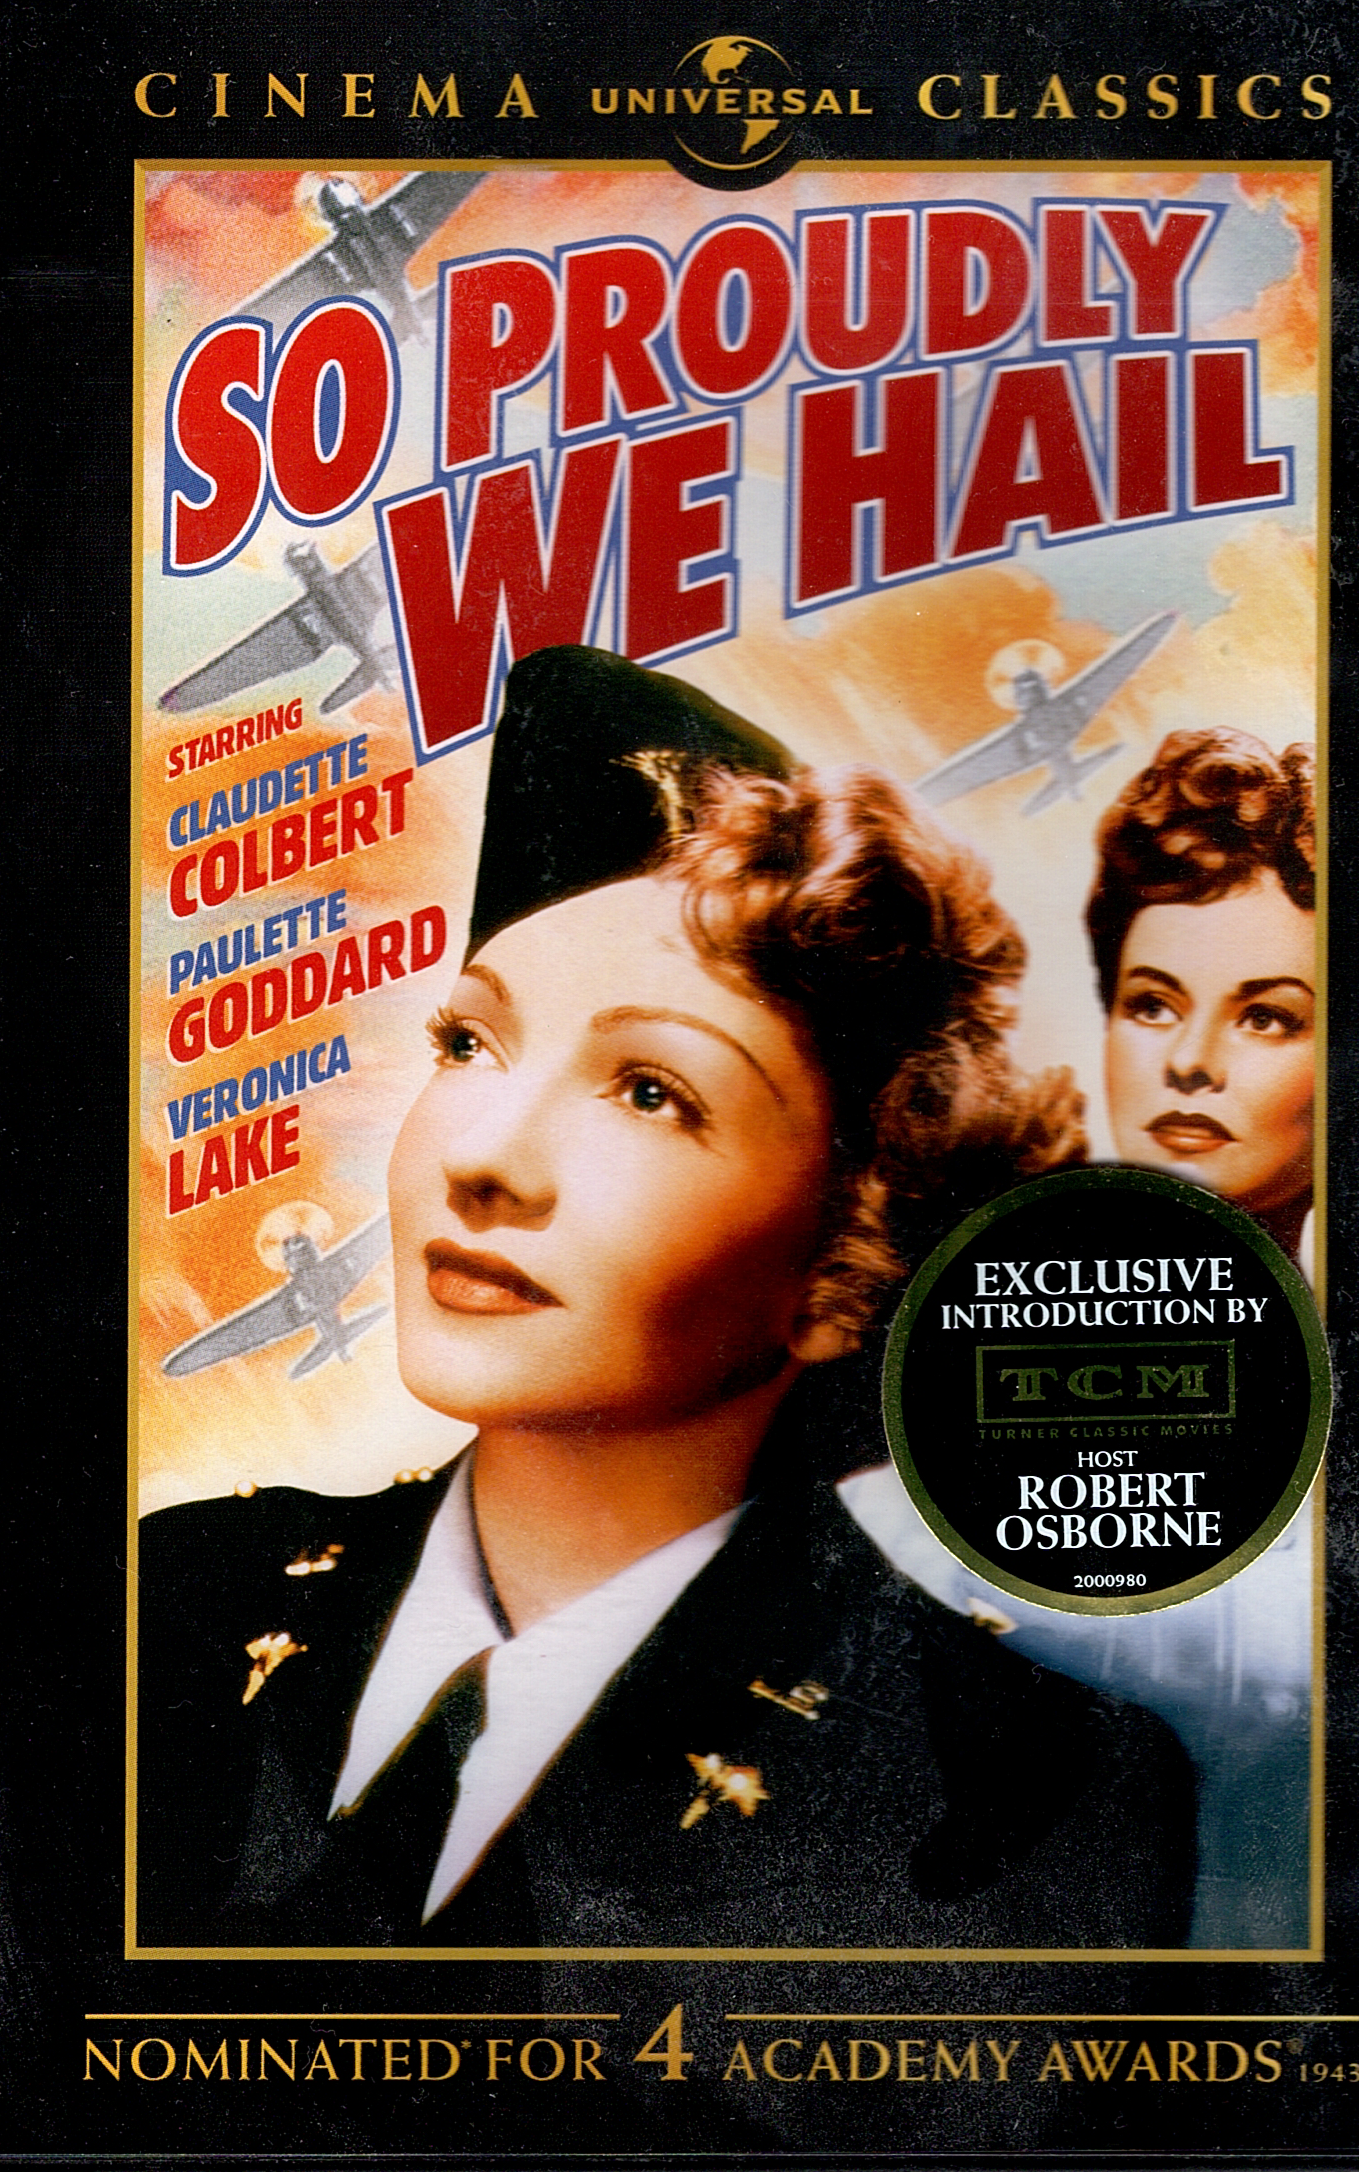 DVD box cover art to So Proudly We Hail (1943).